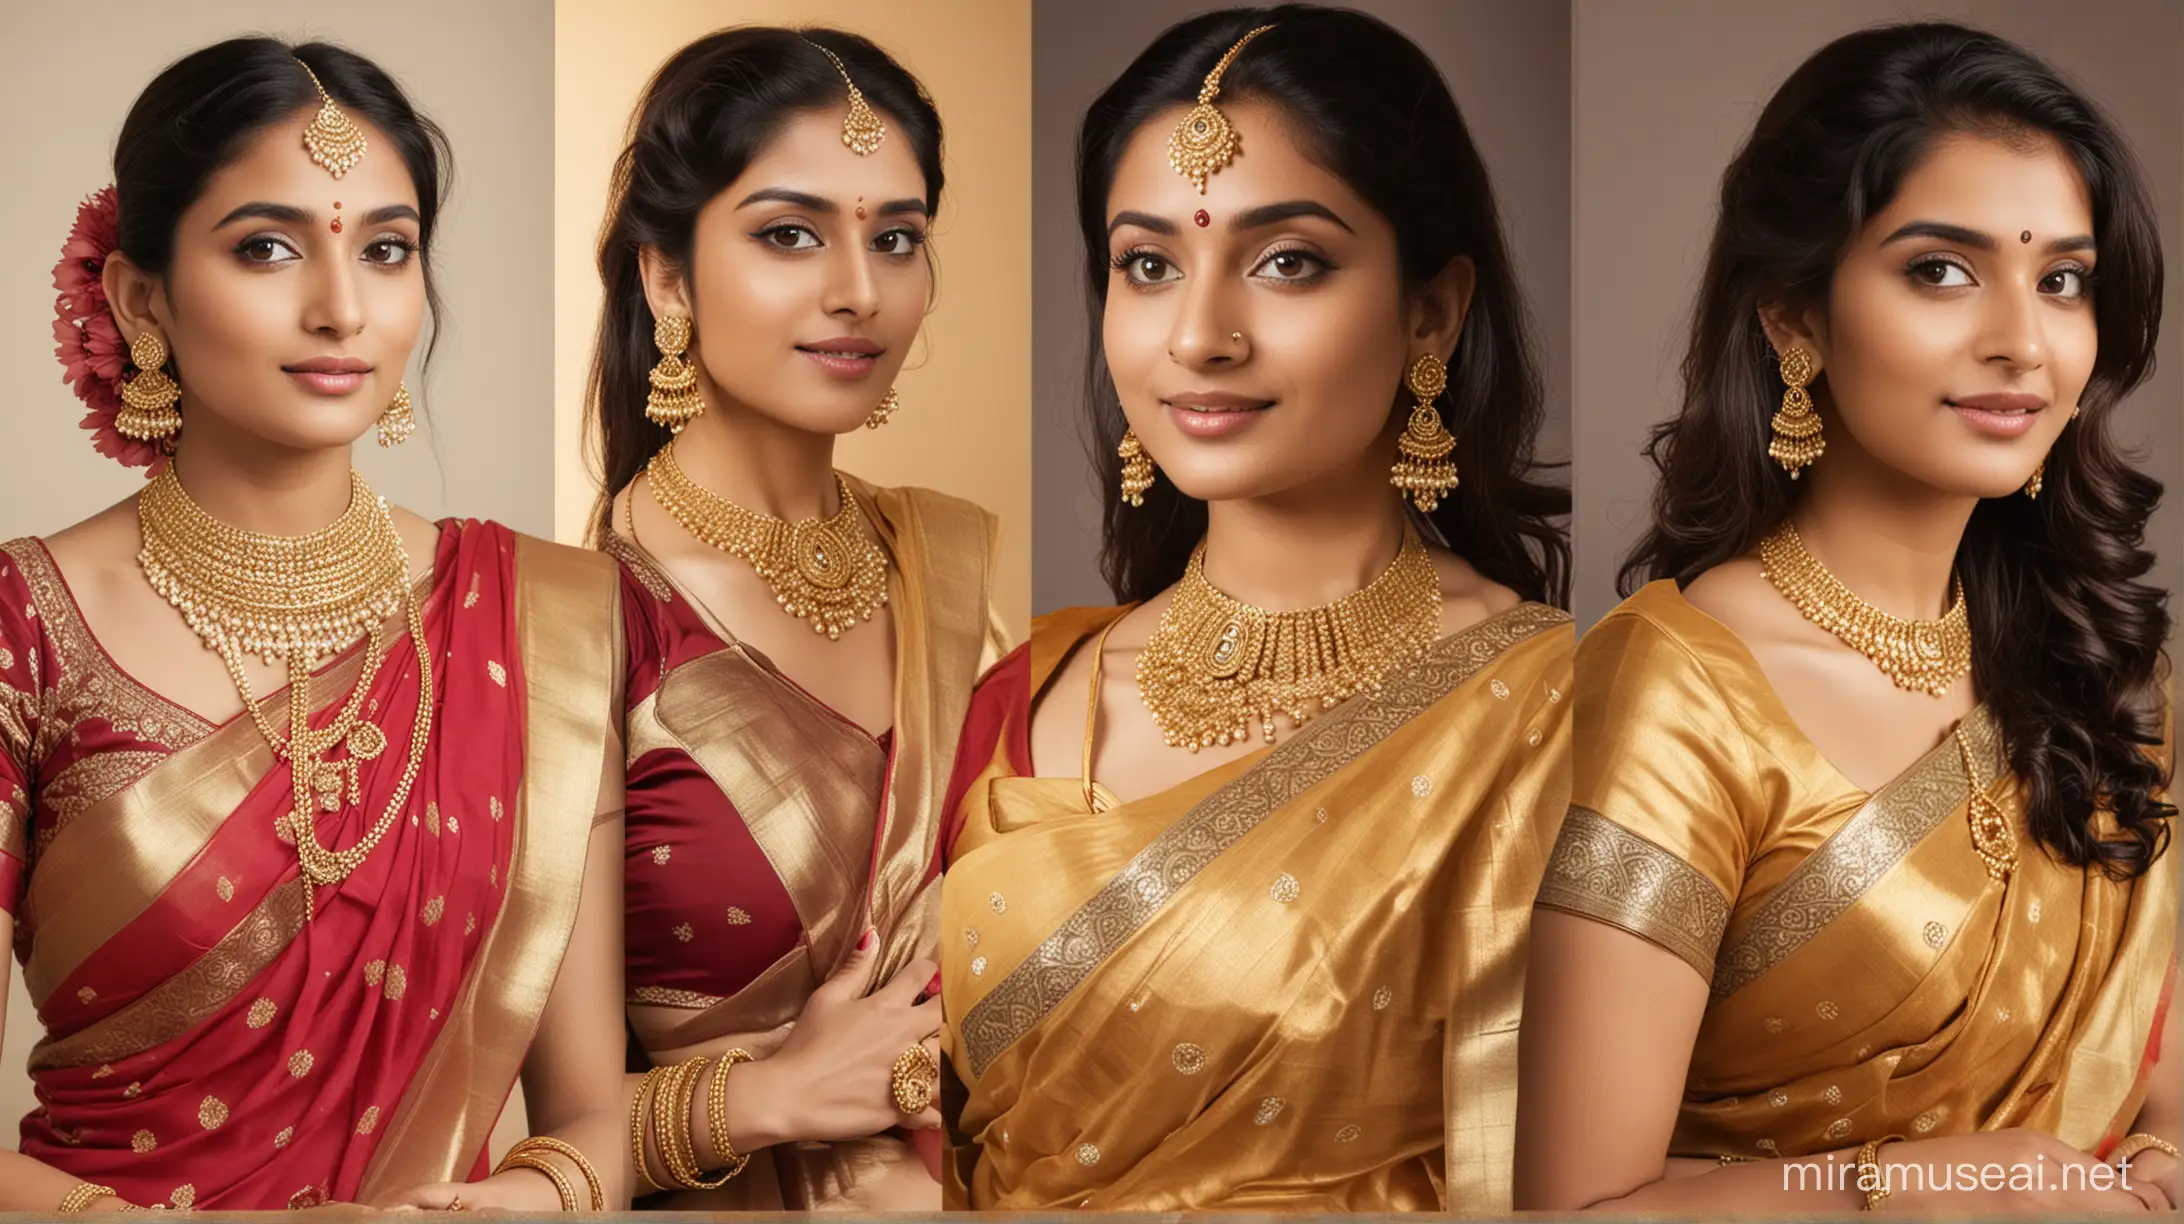 Traditional Indian Women Adorned in Gold Jewelry and Sarees